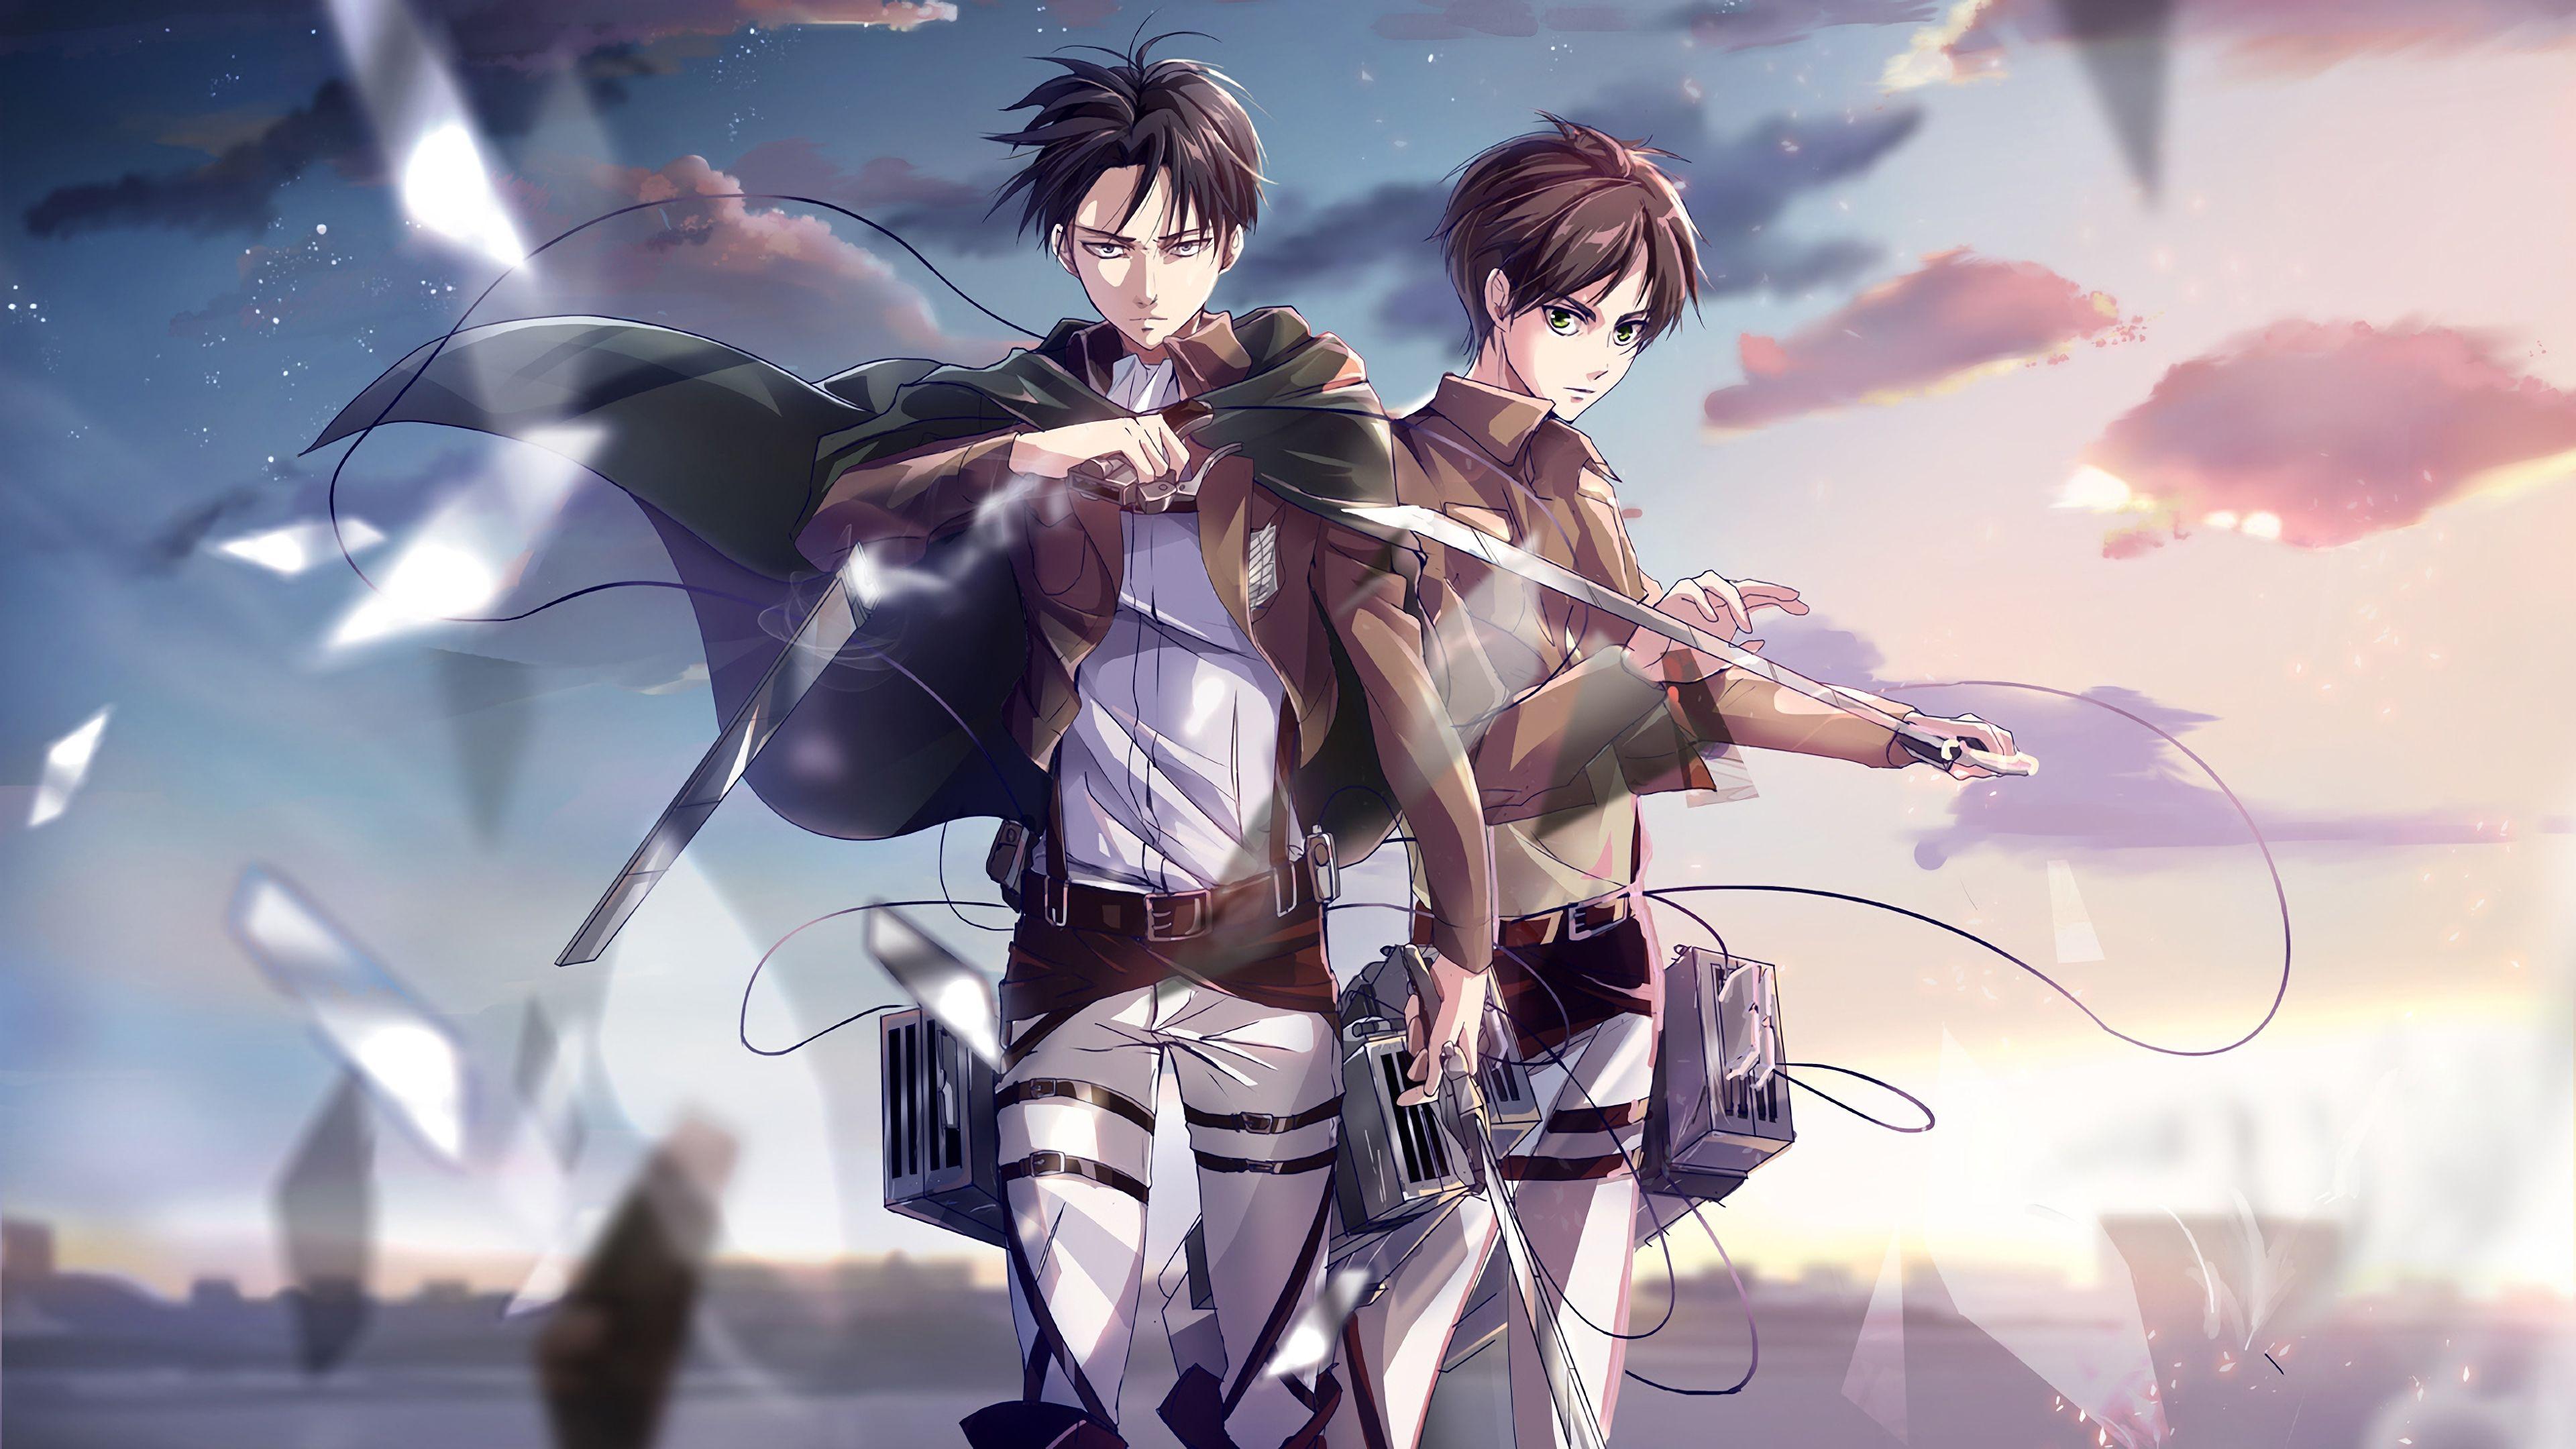 3840 x 2160 · jpeg - Attack On Titan Anime 4k PC Wallpapers - Wallpaper Cave